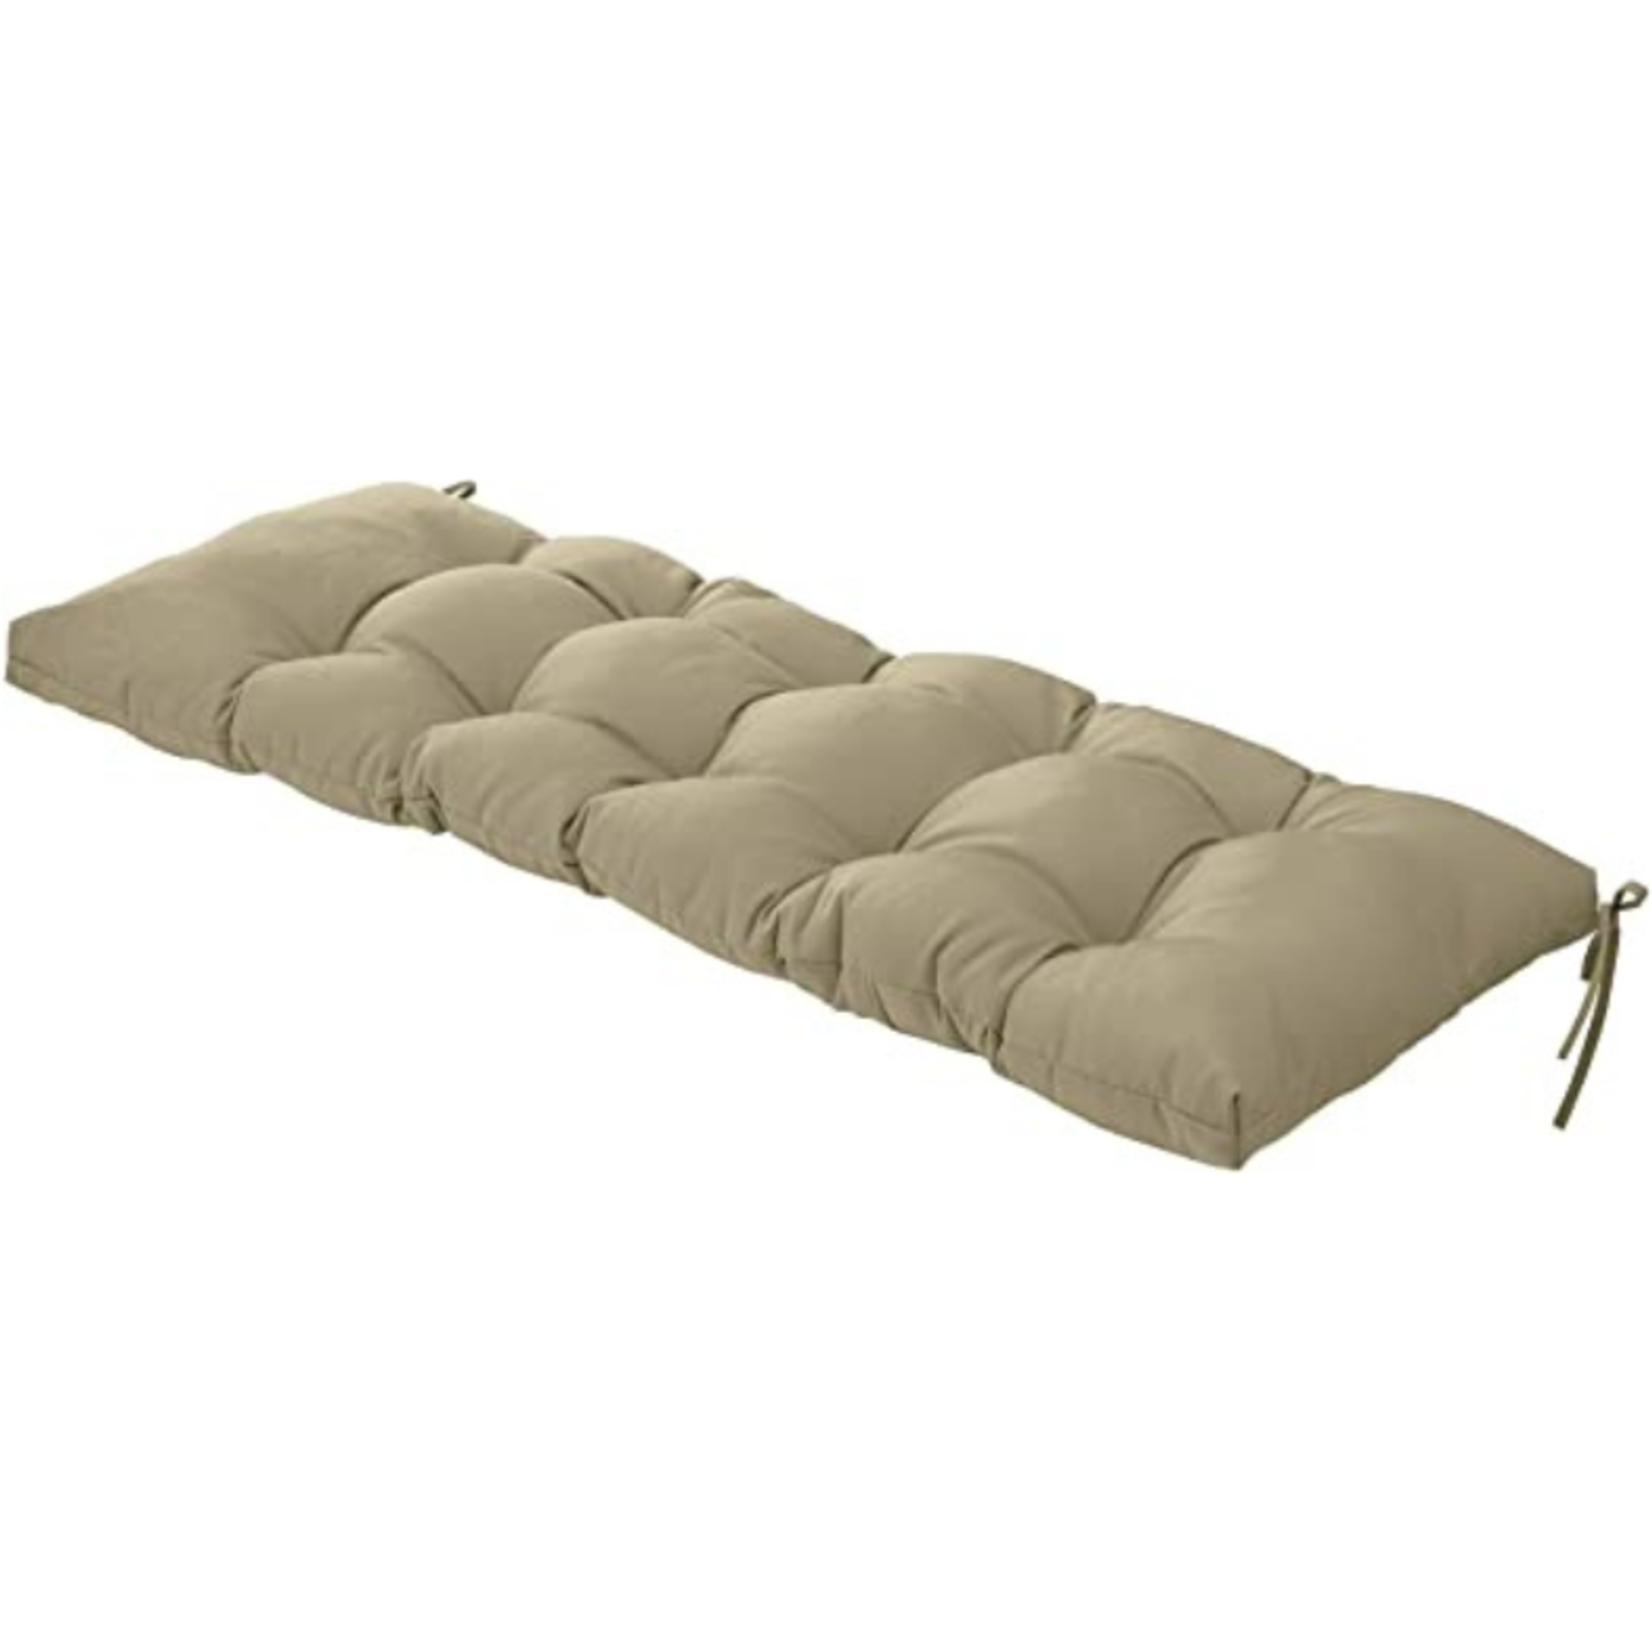 Qilloway Bench Cushion- 51 Inches- Beige